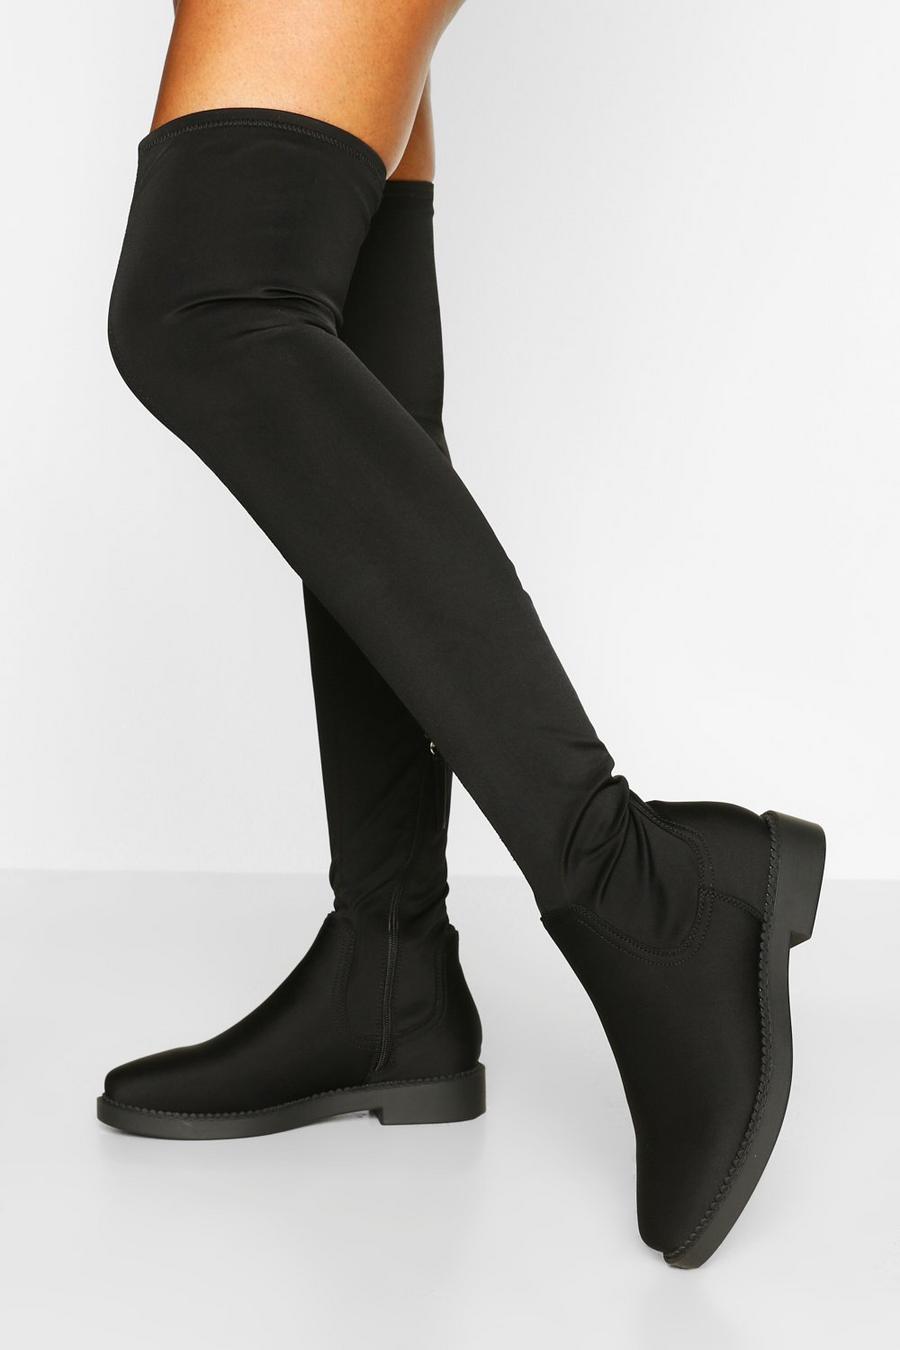 Black Flat Stretch Over The Knee Boots